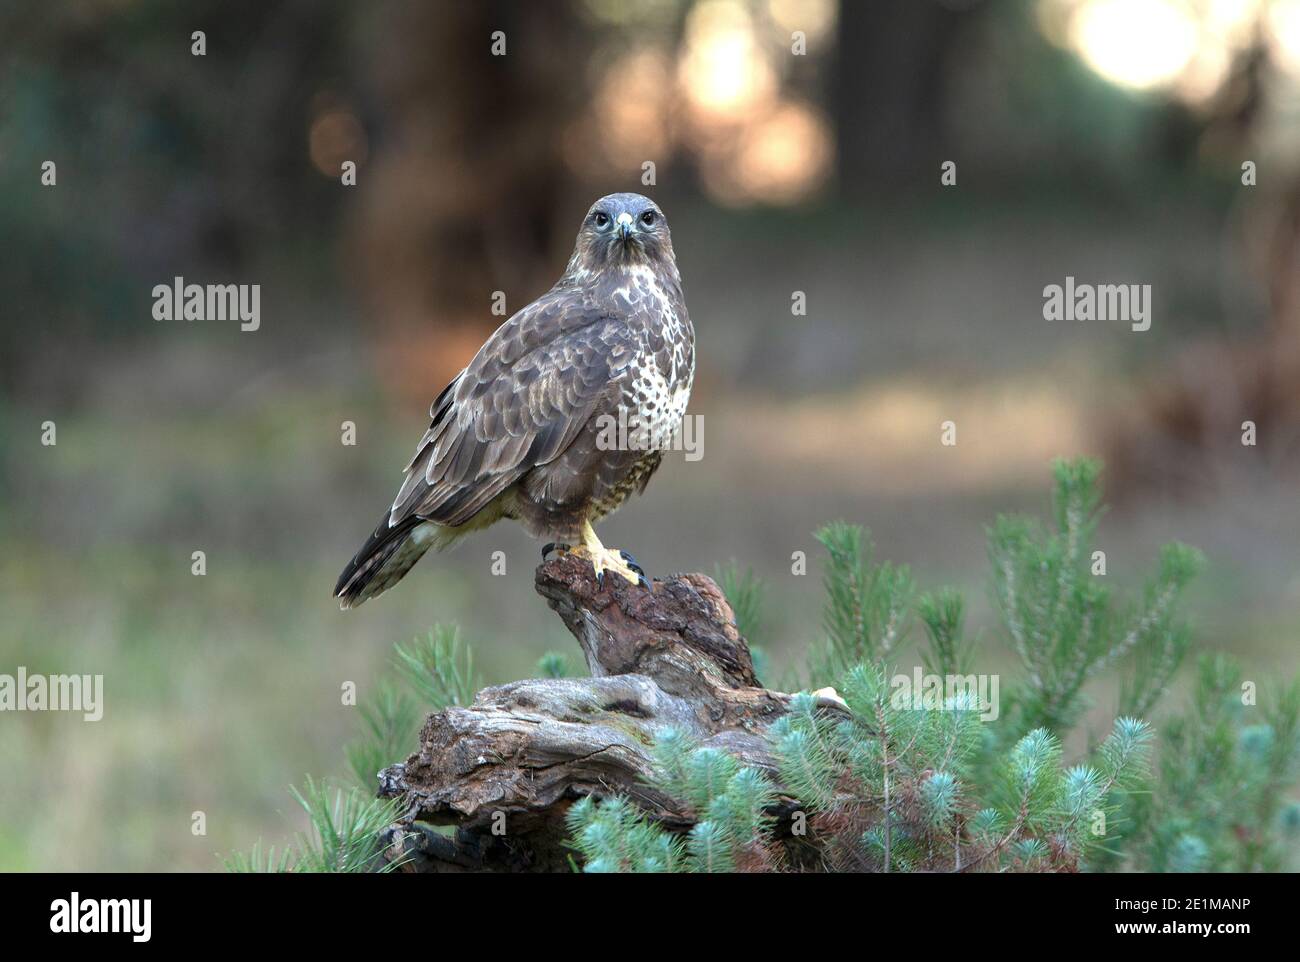 Common buzzard with the last evening lights in a pine forest Stock Photo